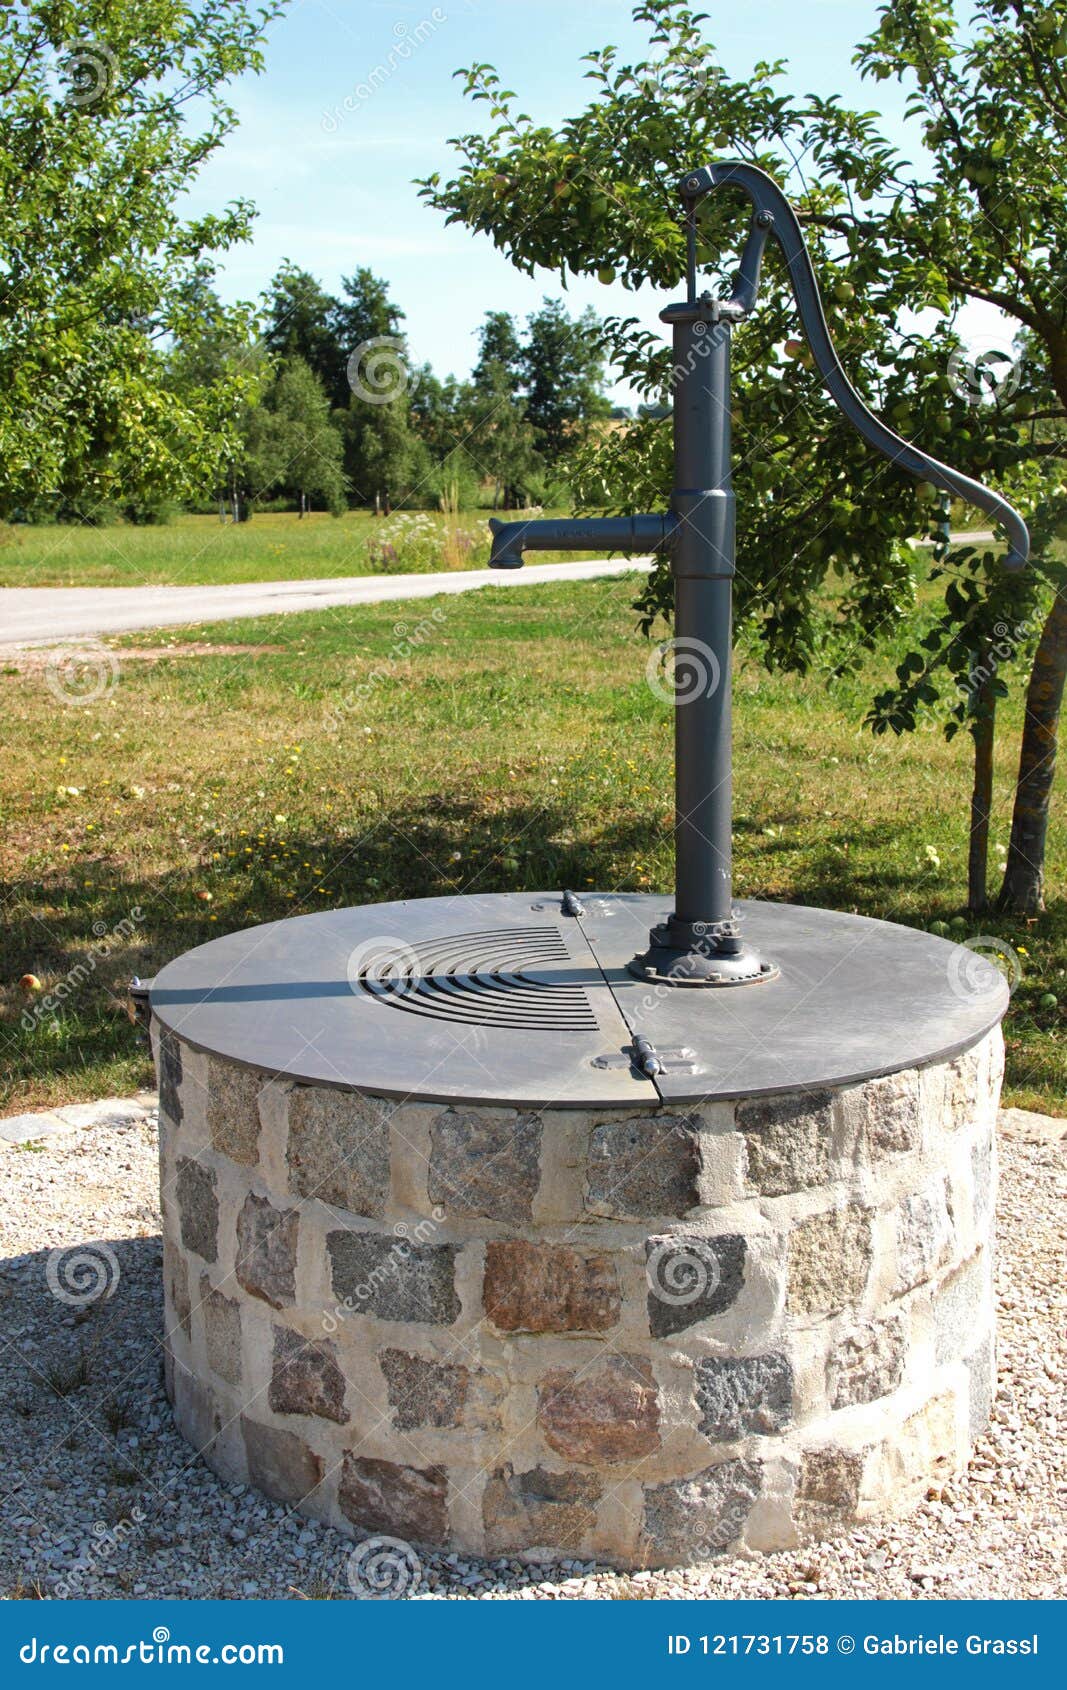 sealed wells with hand pump in an orchard